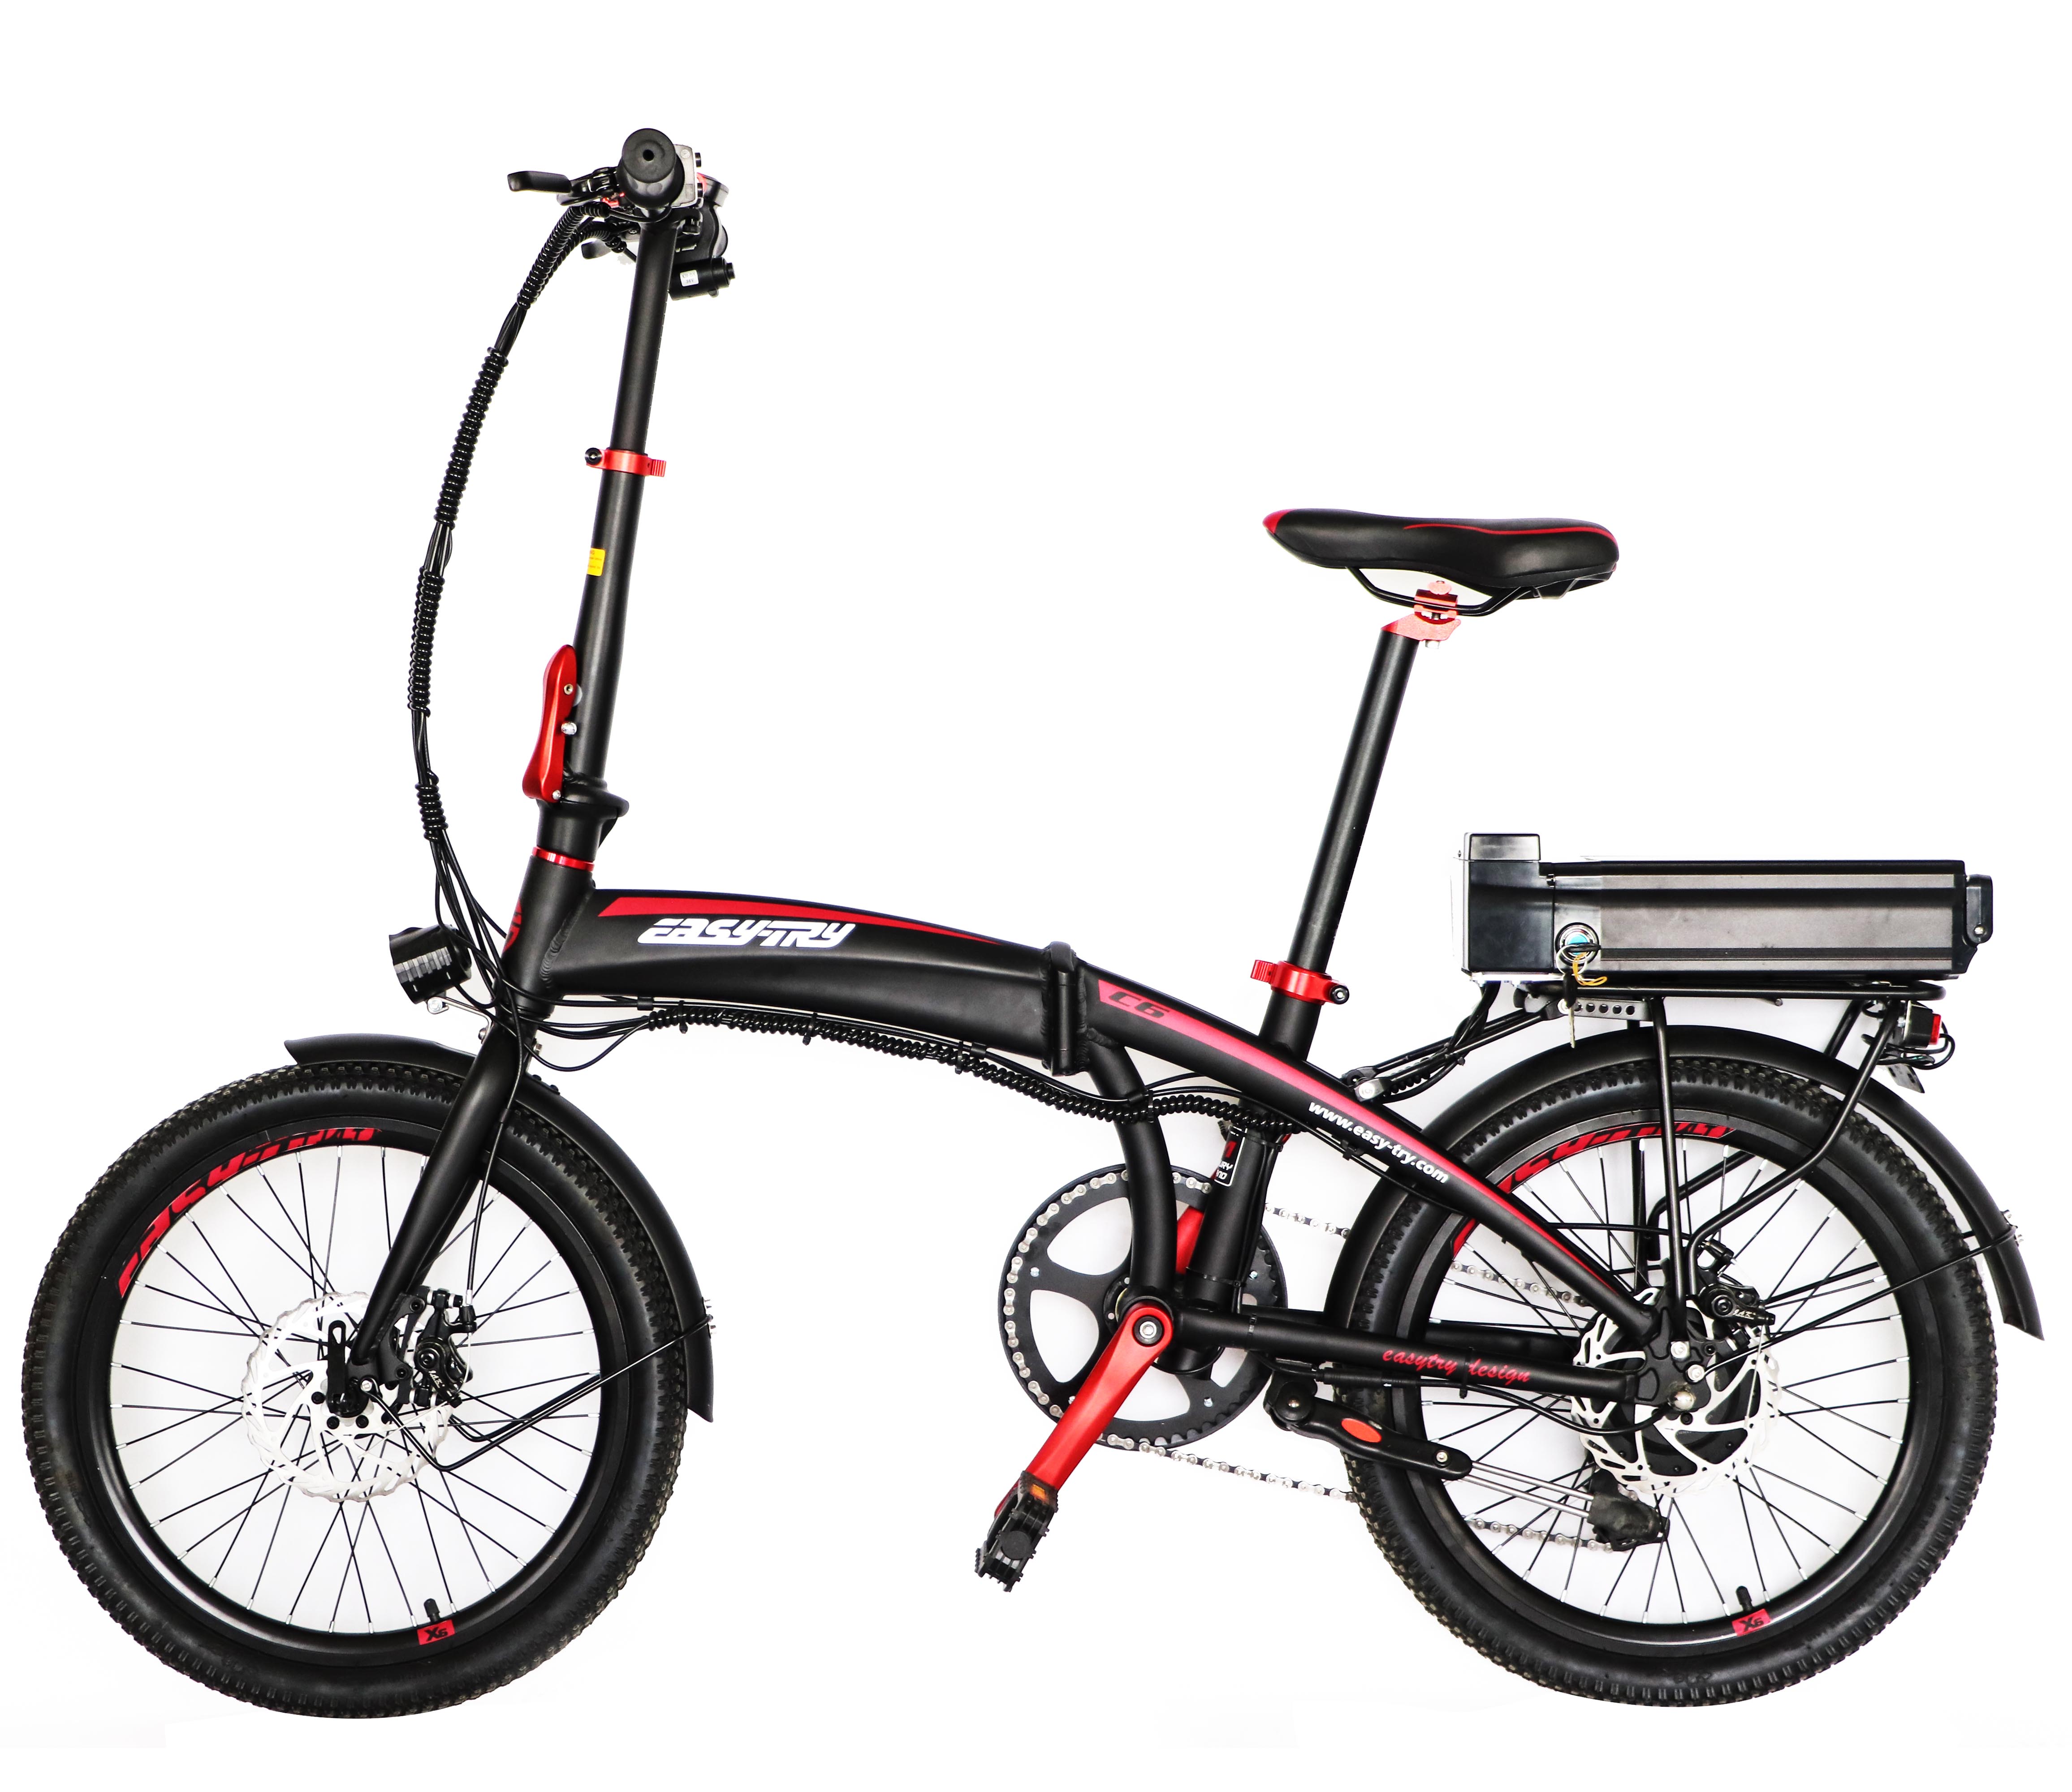 new design 10.4AH lithium battery ebike 20 inch foldable electric cycling 36V 250W electric cycle